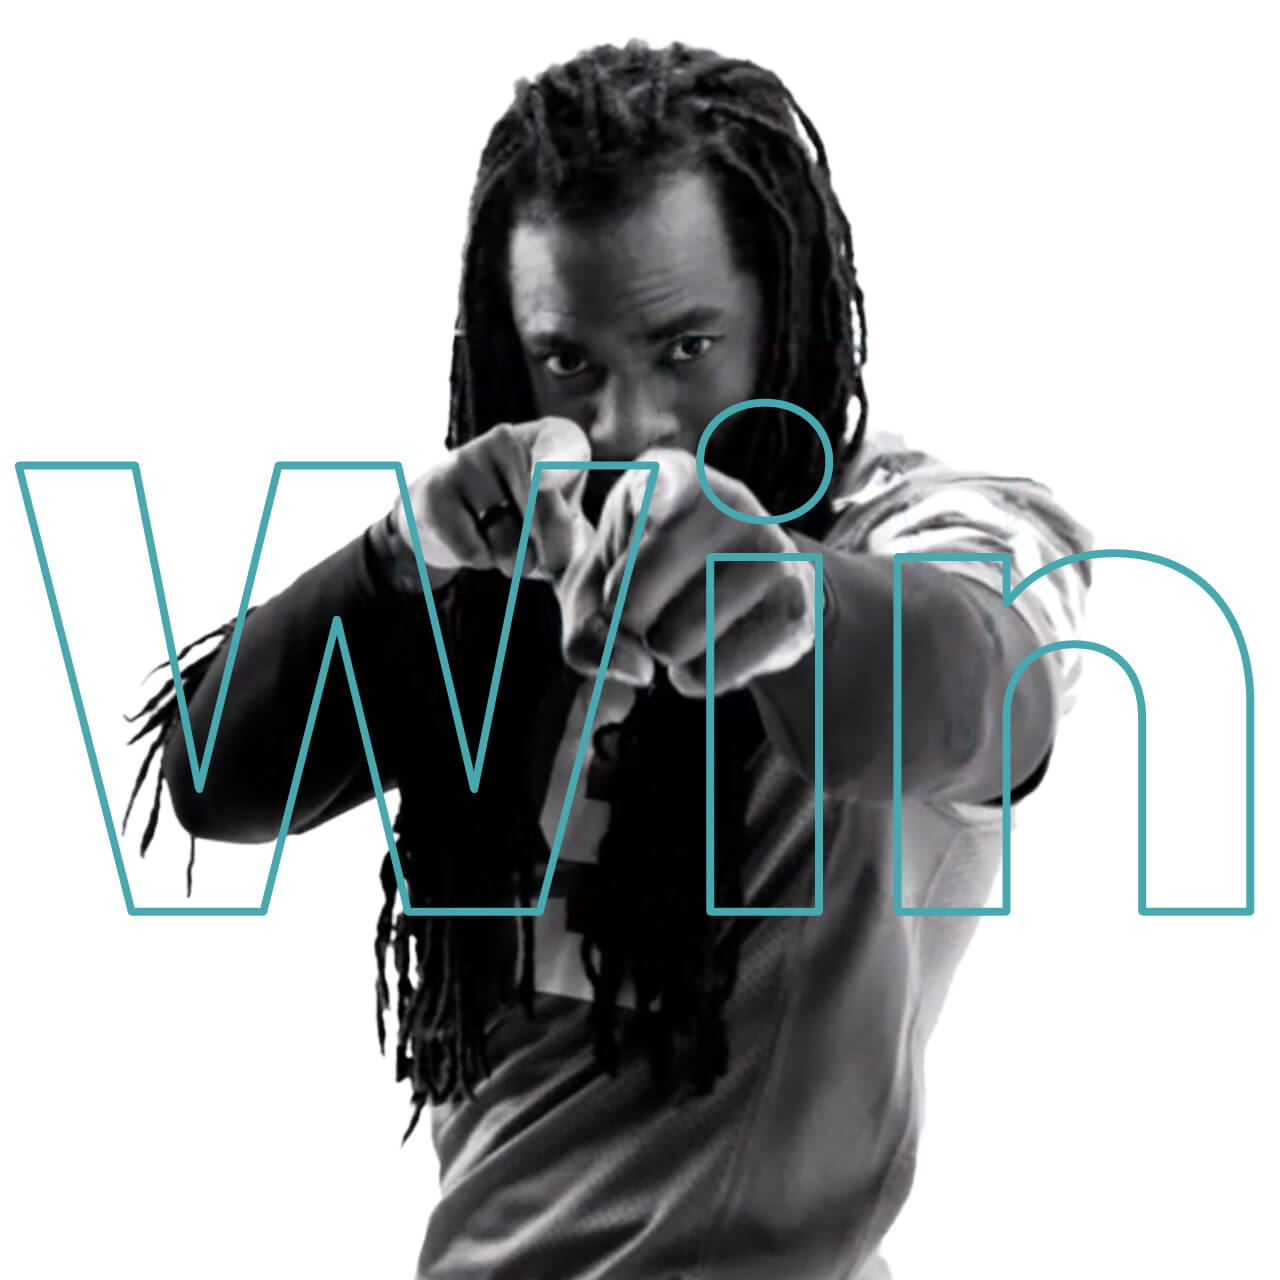 Richard Sherman with 'WIN' text